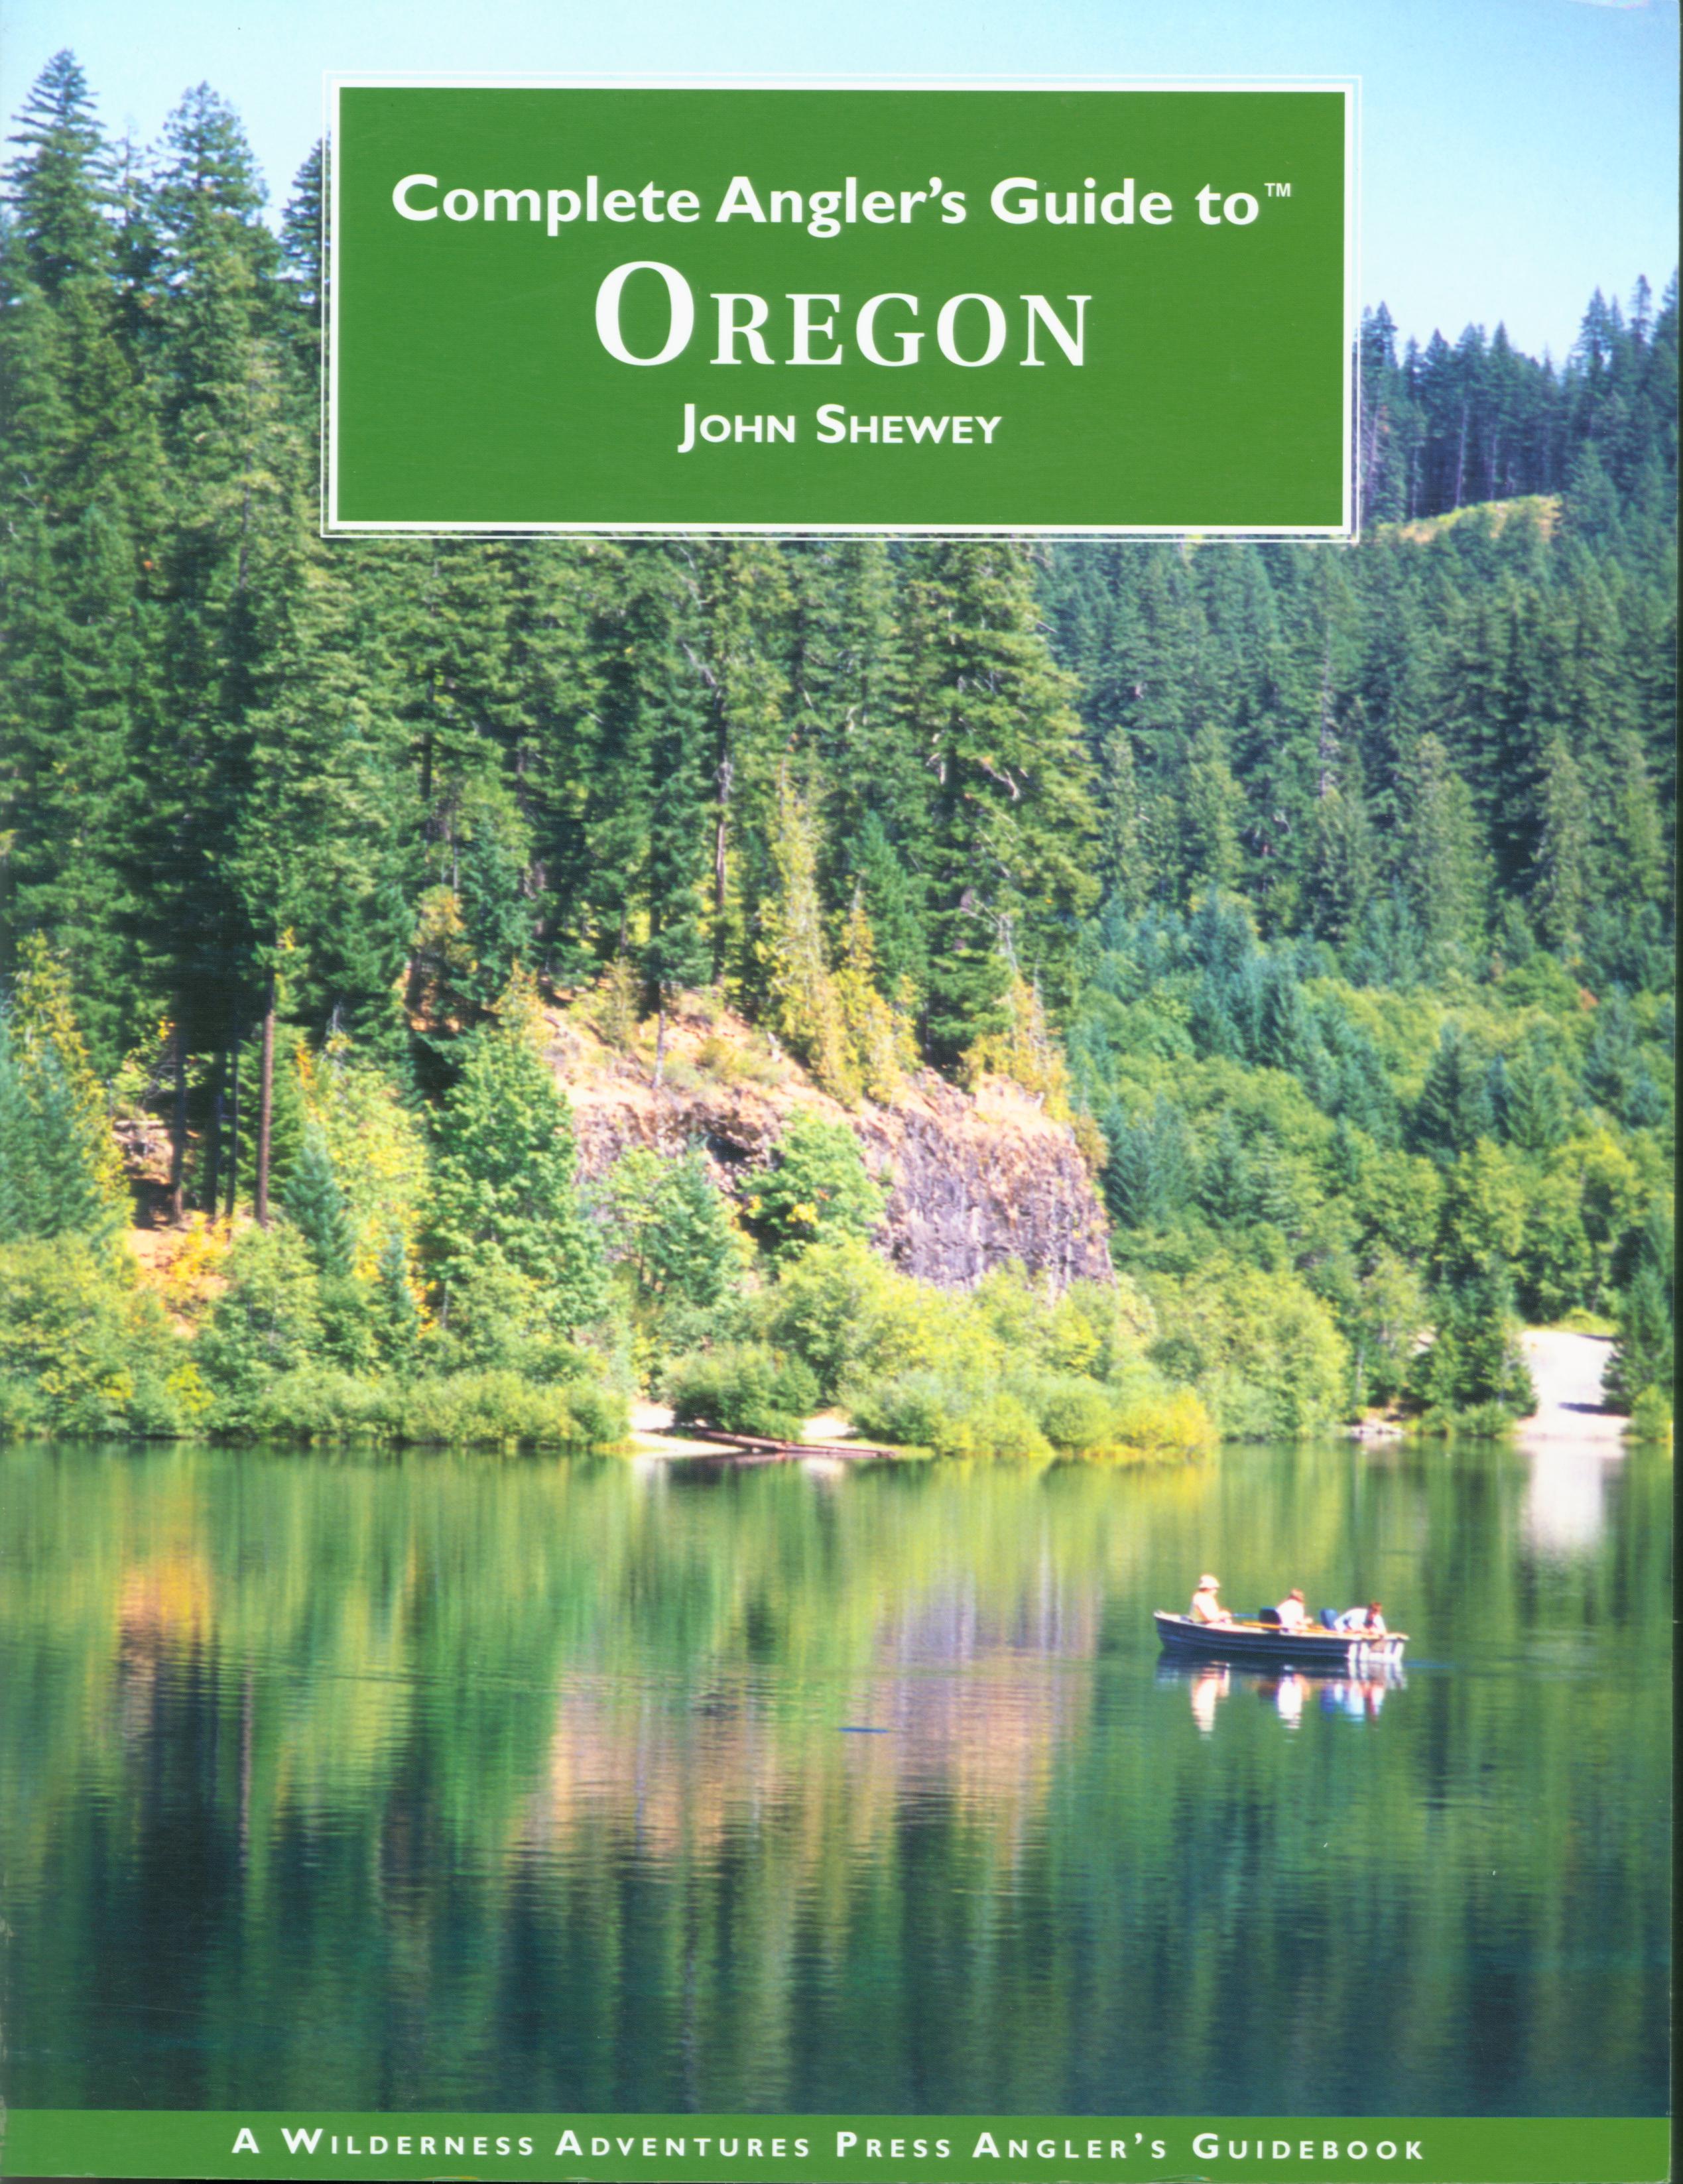 COMPLETE ANGLER'S GUIDE TO OREGON. 